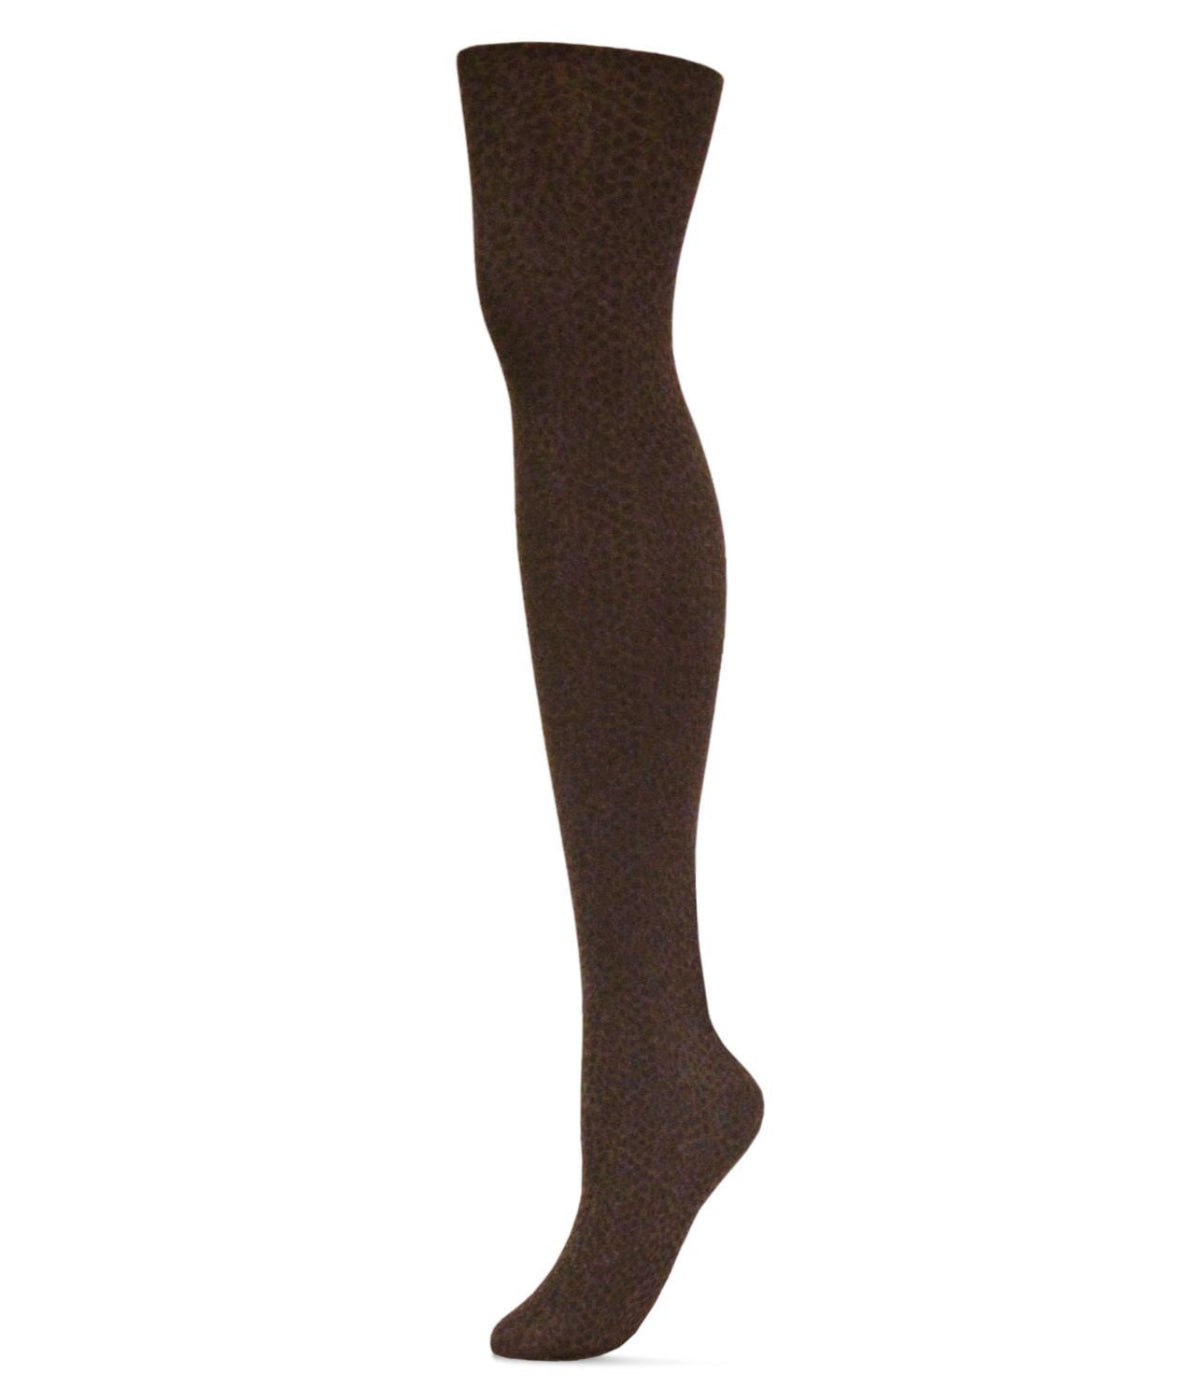 Upscale Snake Skin Opaque Tights Coffee Bean